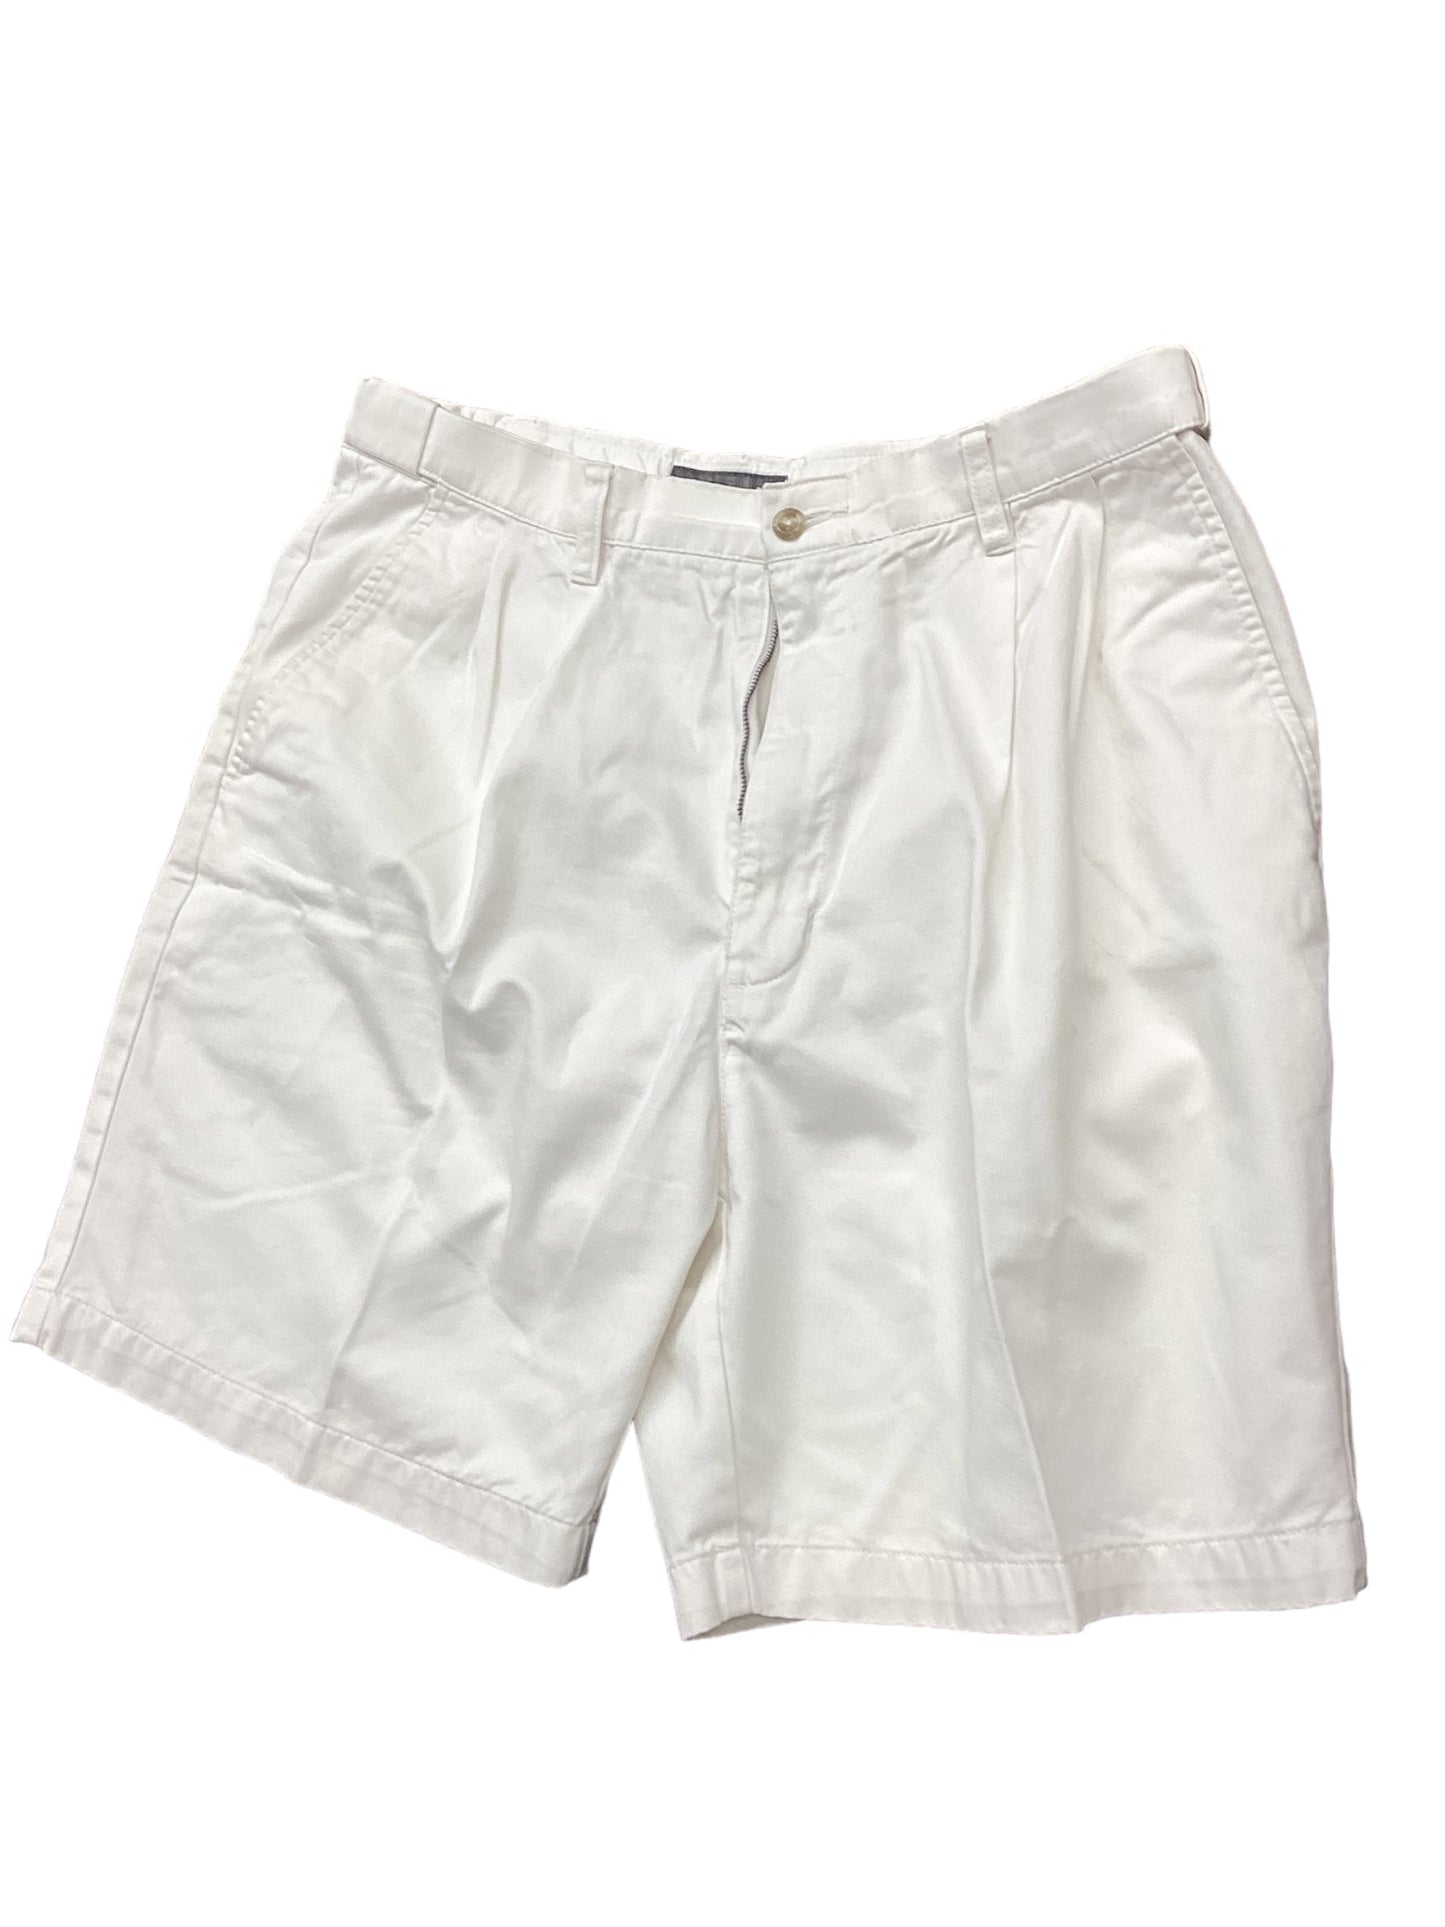 White Shorts Croft And Barrow, Size 36